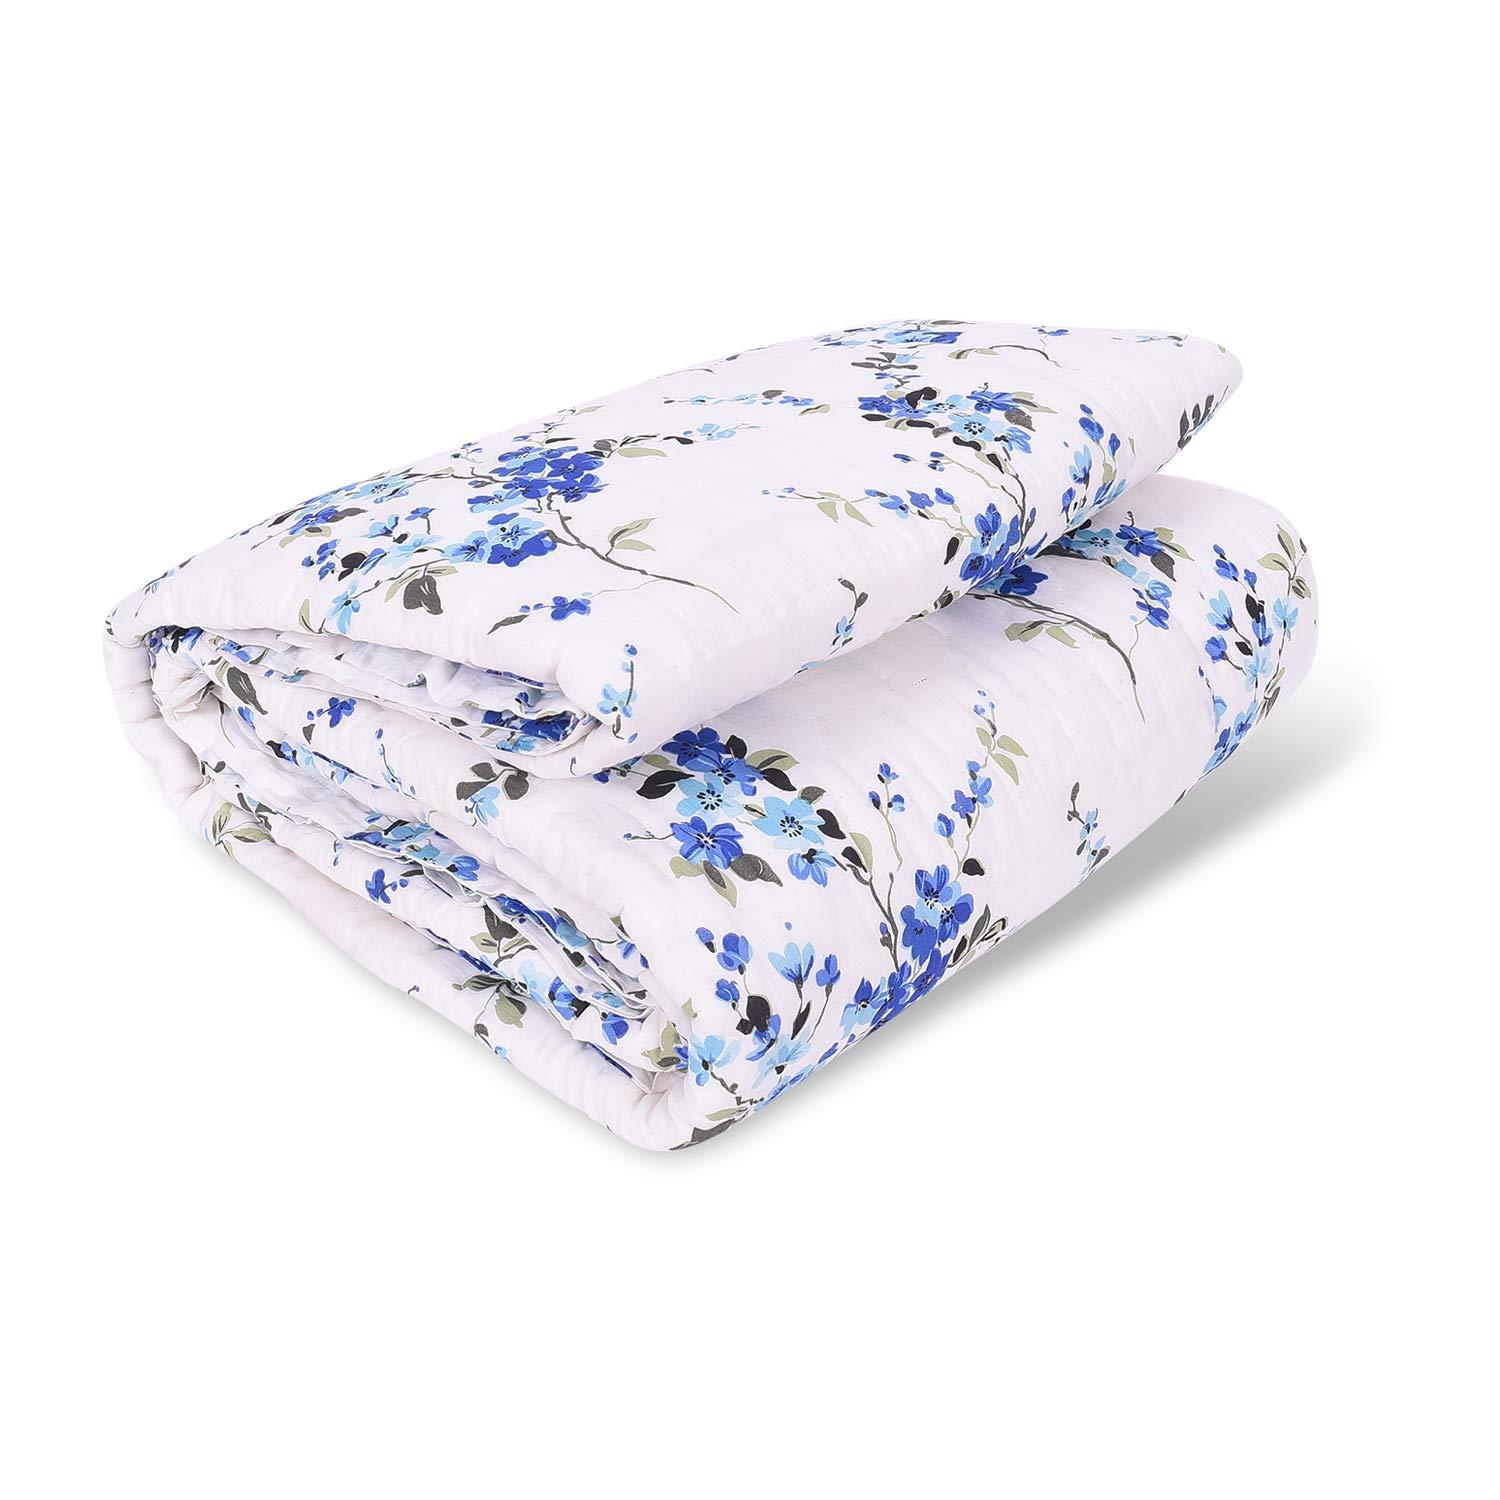 Mom's Home Organic Cotton Double Bed- Soft and Light Weight Comfortor/Quilt - Blue Floral - - 90"*108''